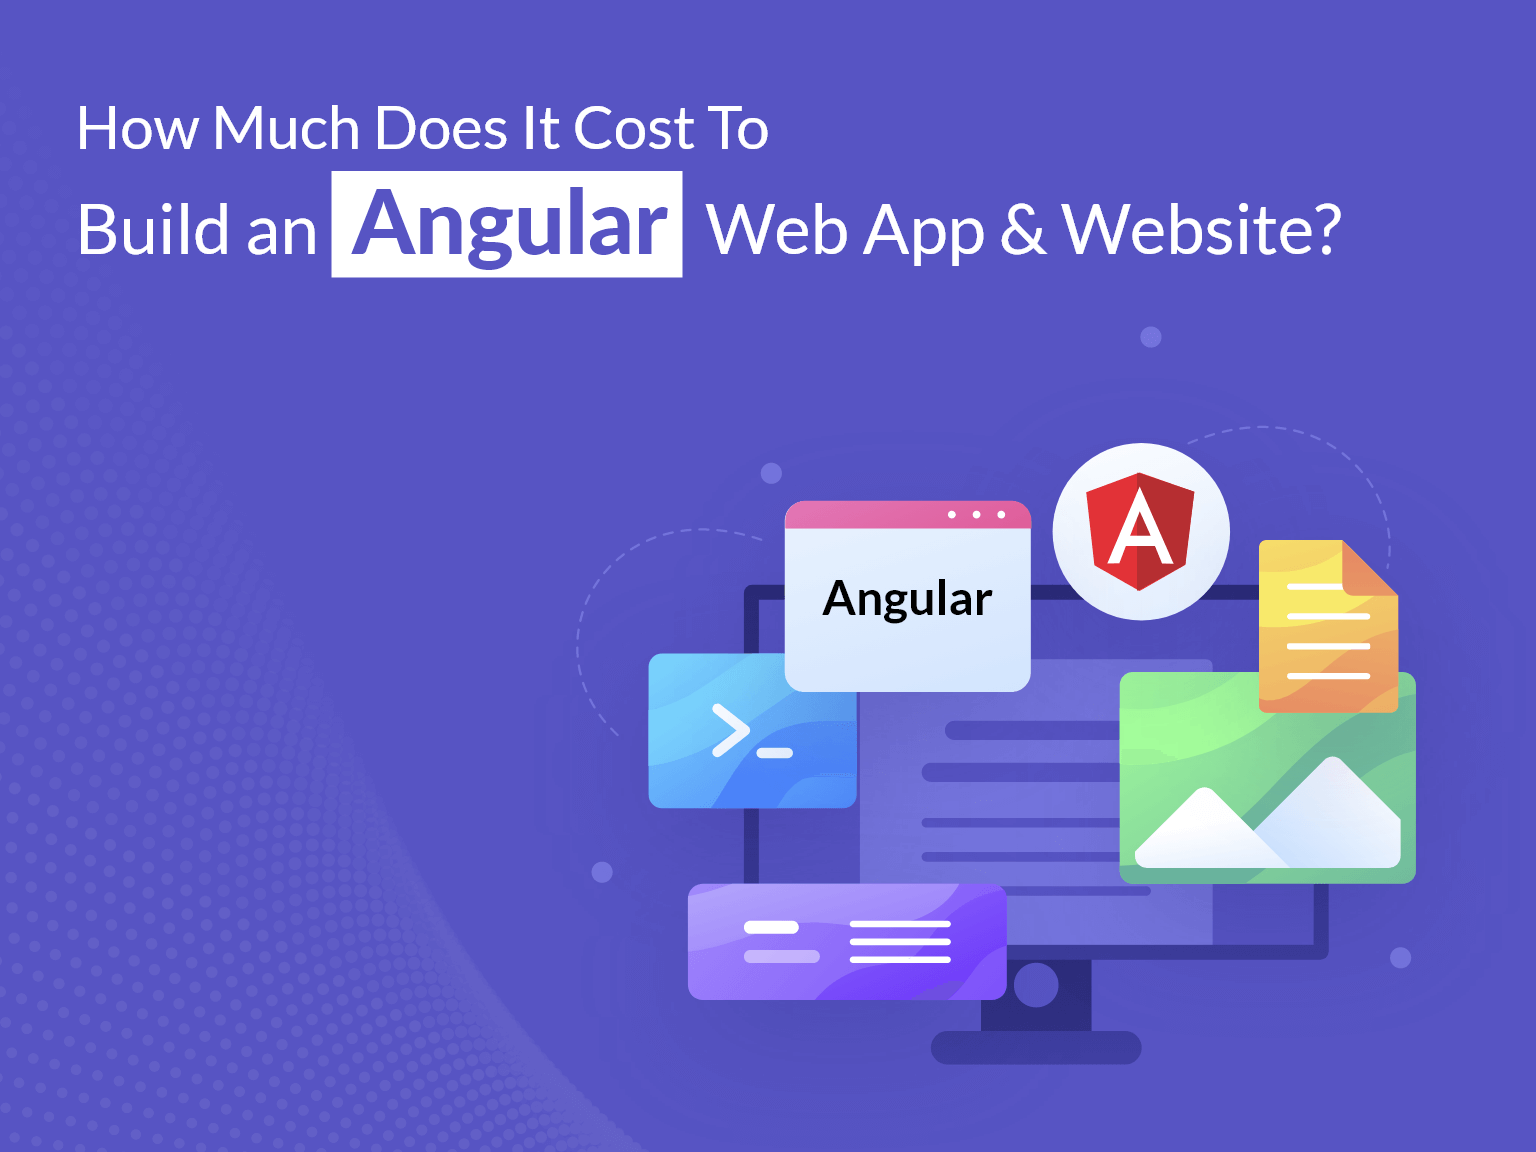 How Much Does It Cost To Develop An AngularJS Web App and Website?